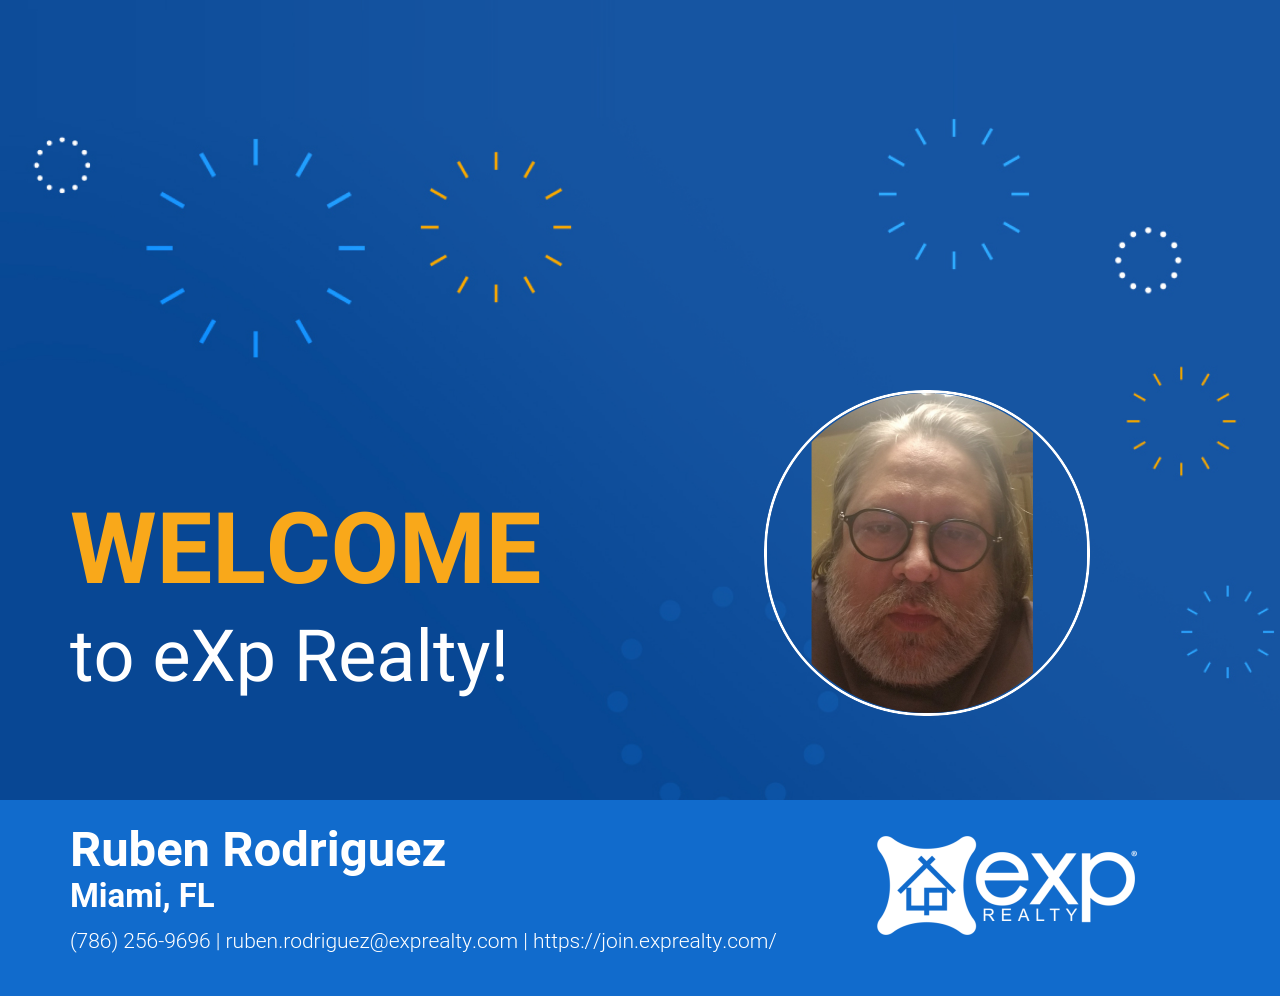 Welcome to eXp Realty Ruben Rodriguez!